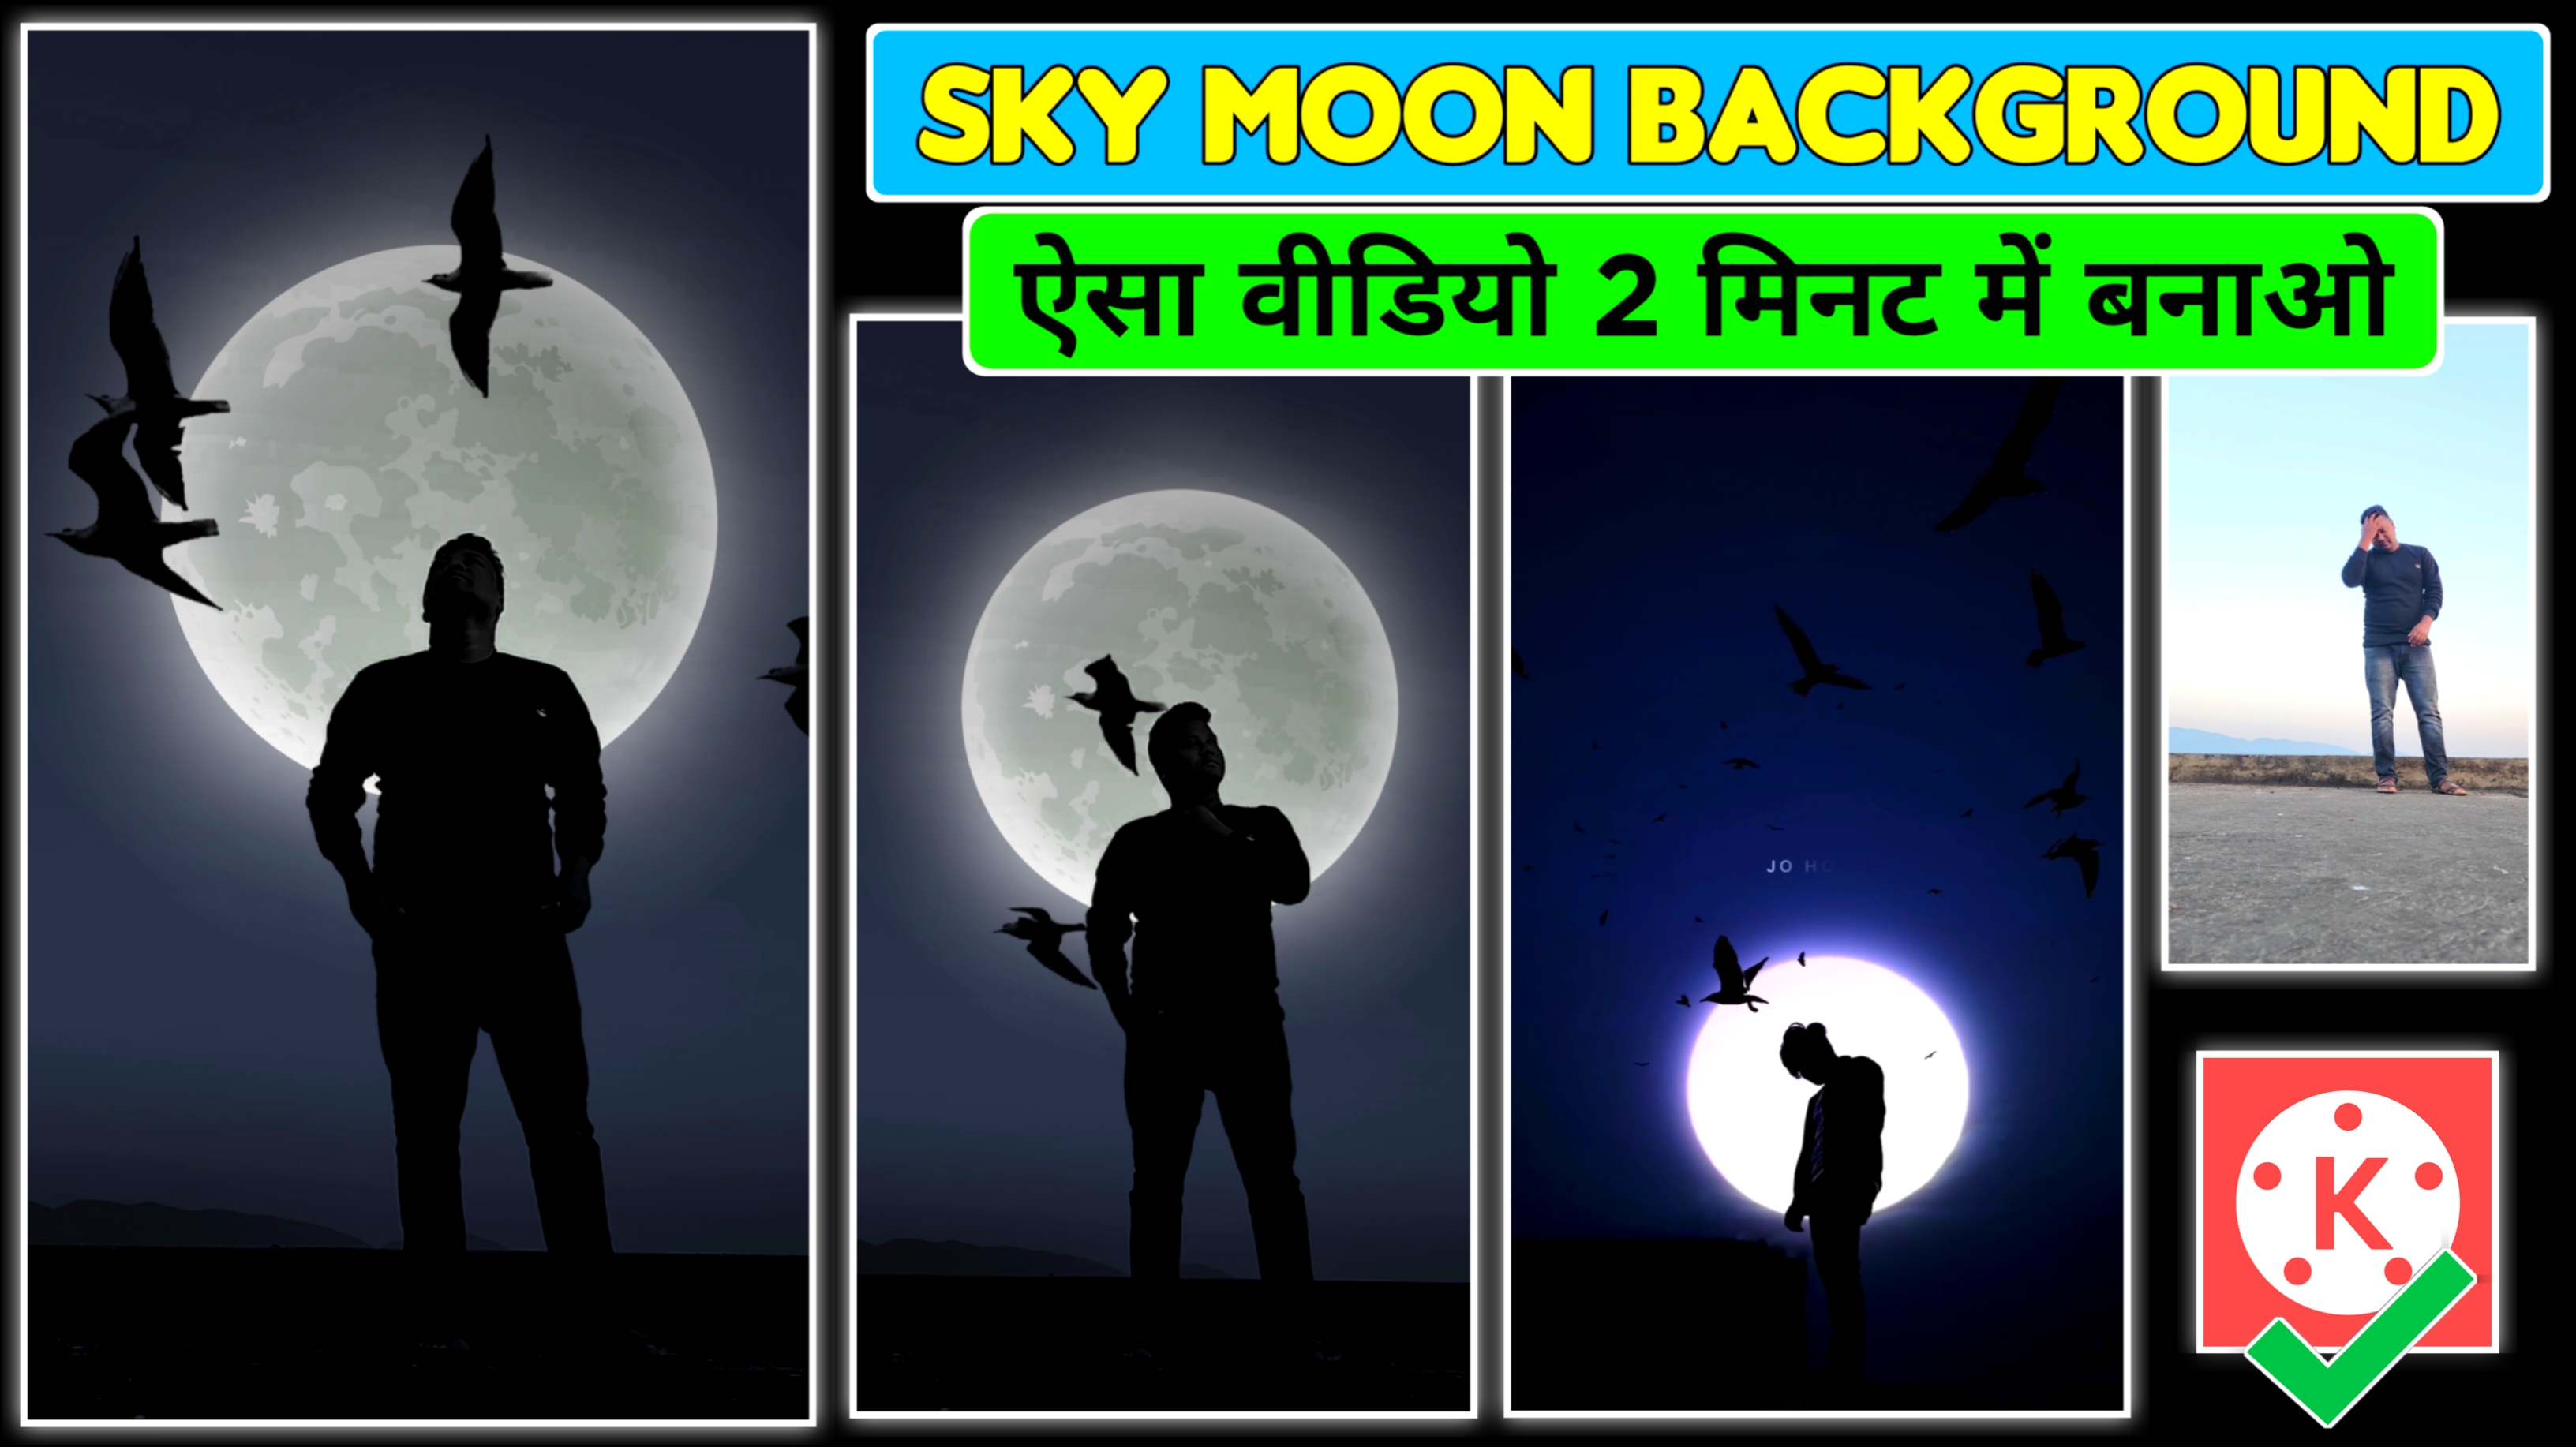 How To Make Sky Moon Background Video || Sky Moon Background Video ...